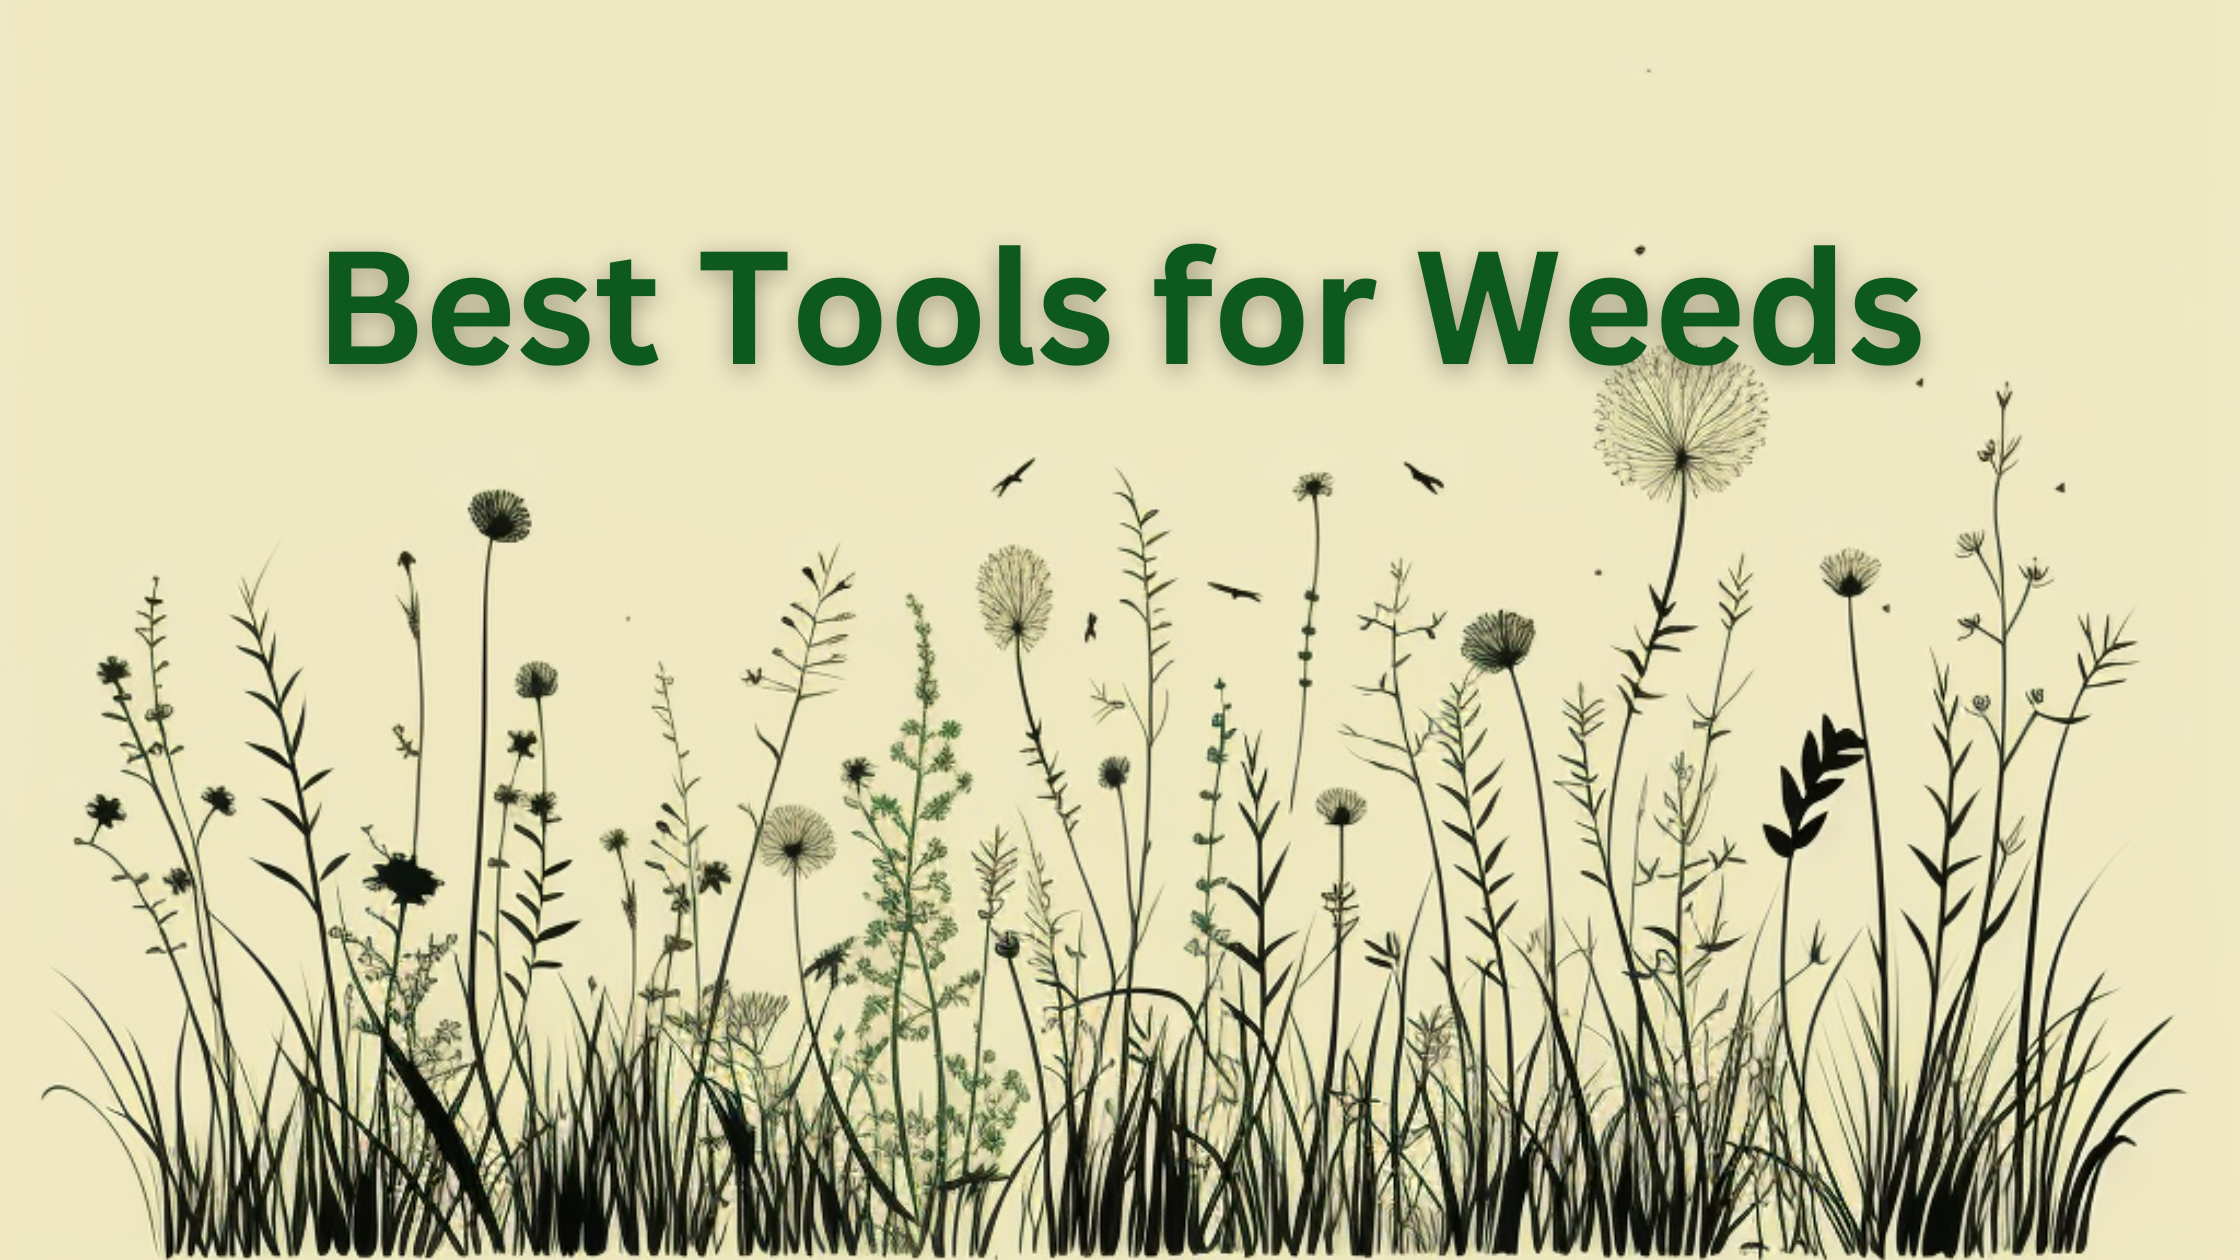 Best Tools for Weeds